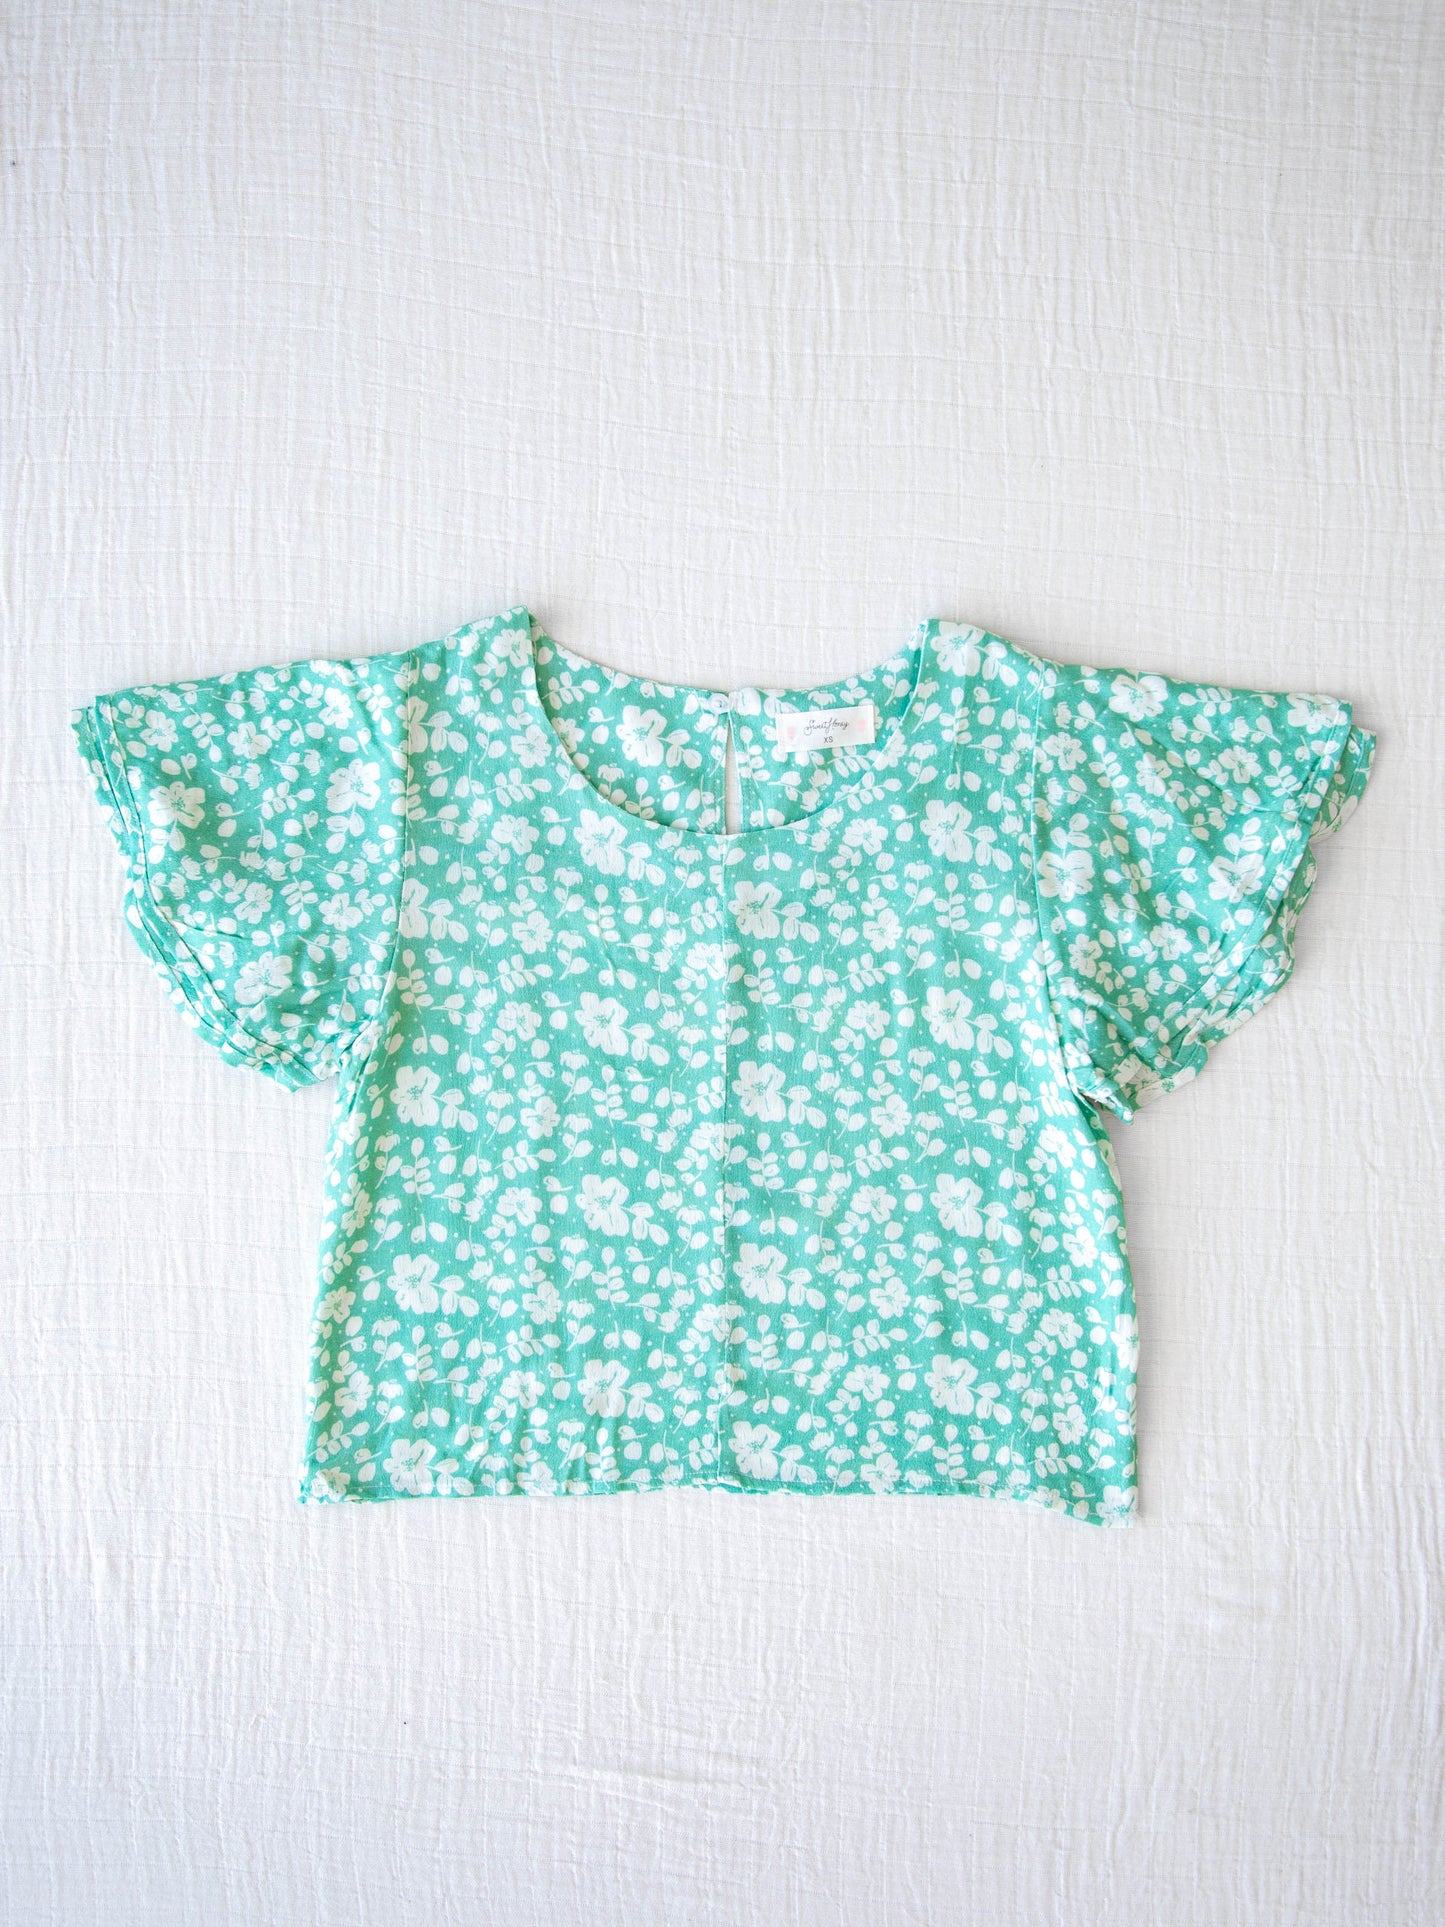 Classic Flutter Top - Green Rush. This top has a keyhole back and flowy double ruffle sleeves. It is a pattern of white flowers and leaves on a vibrant green background.